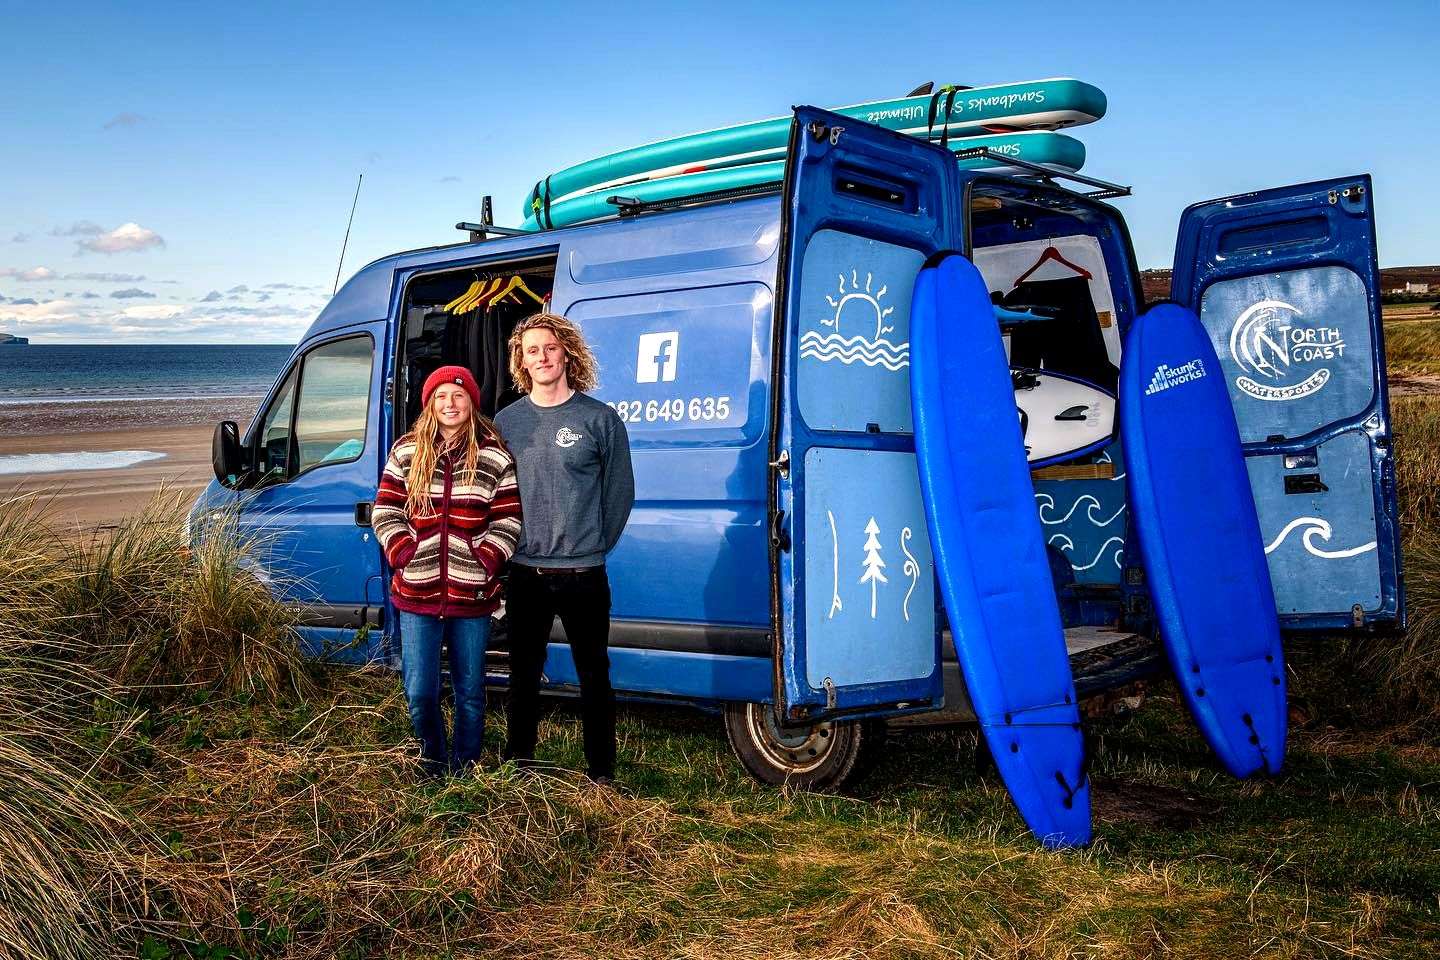 North Coast Watersports was awarded £67,000 in a previous round of the fund.